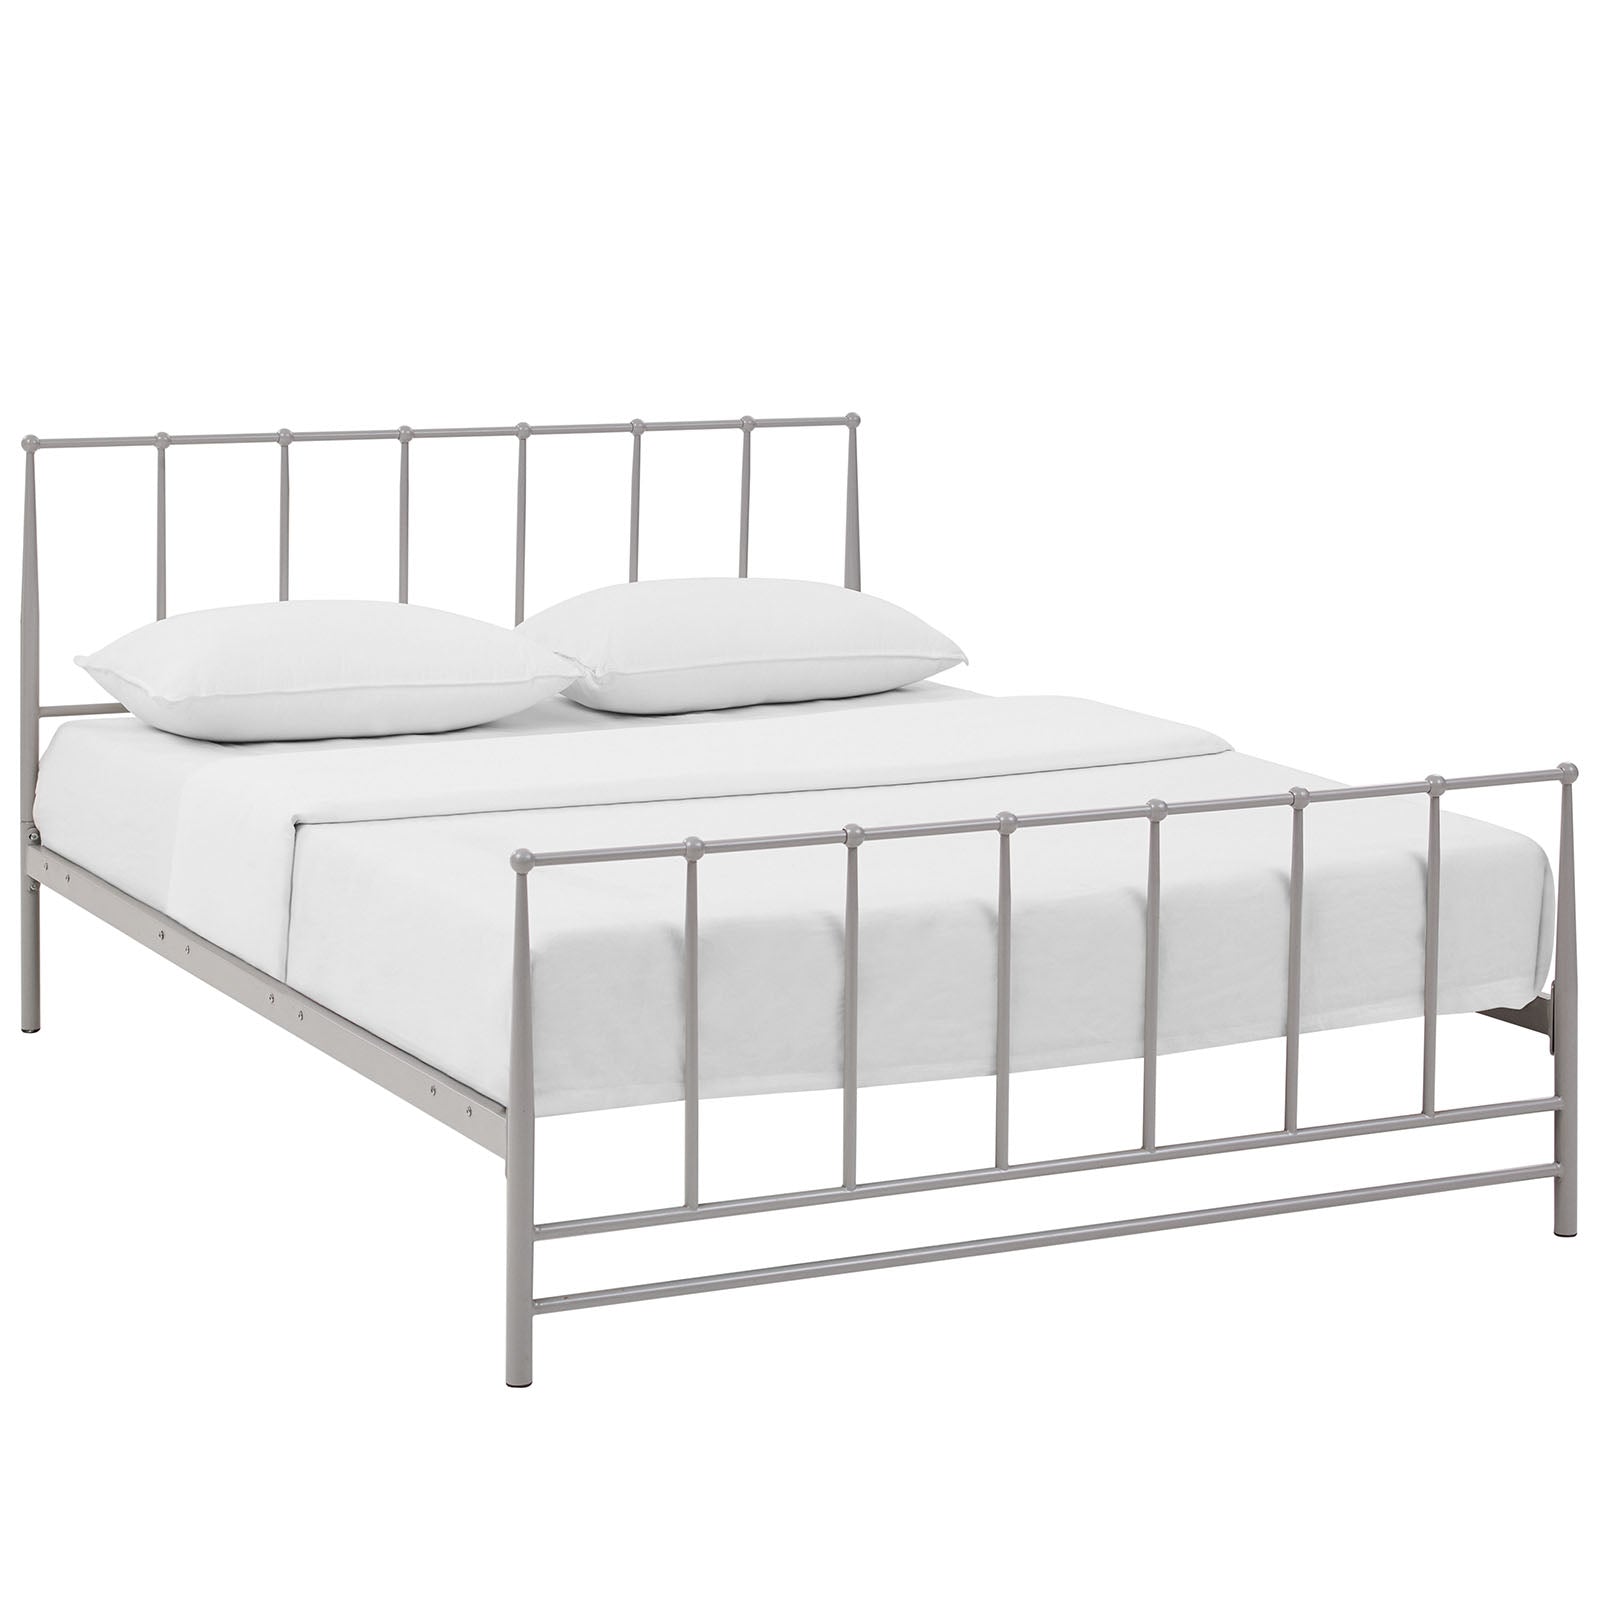 Modway Beds - Estate Full Bed Gray